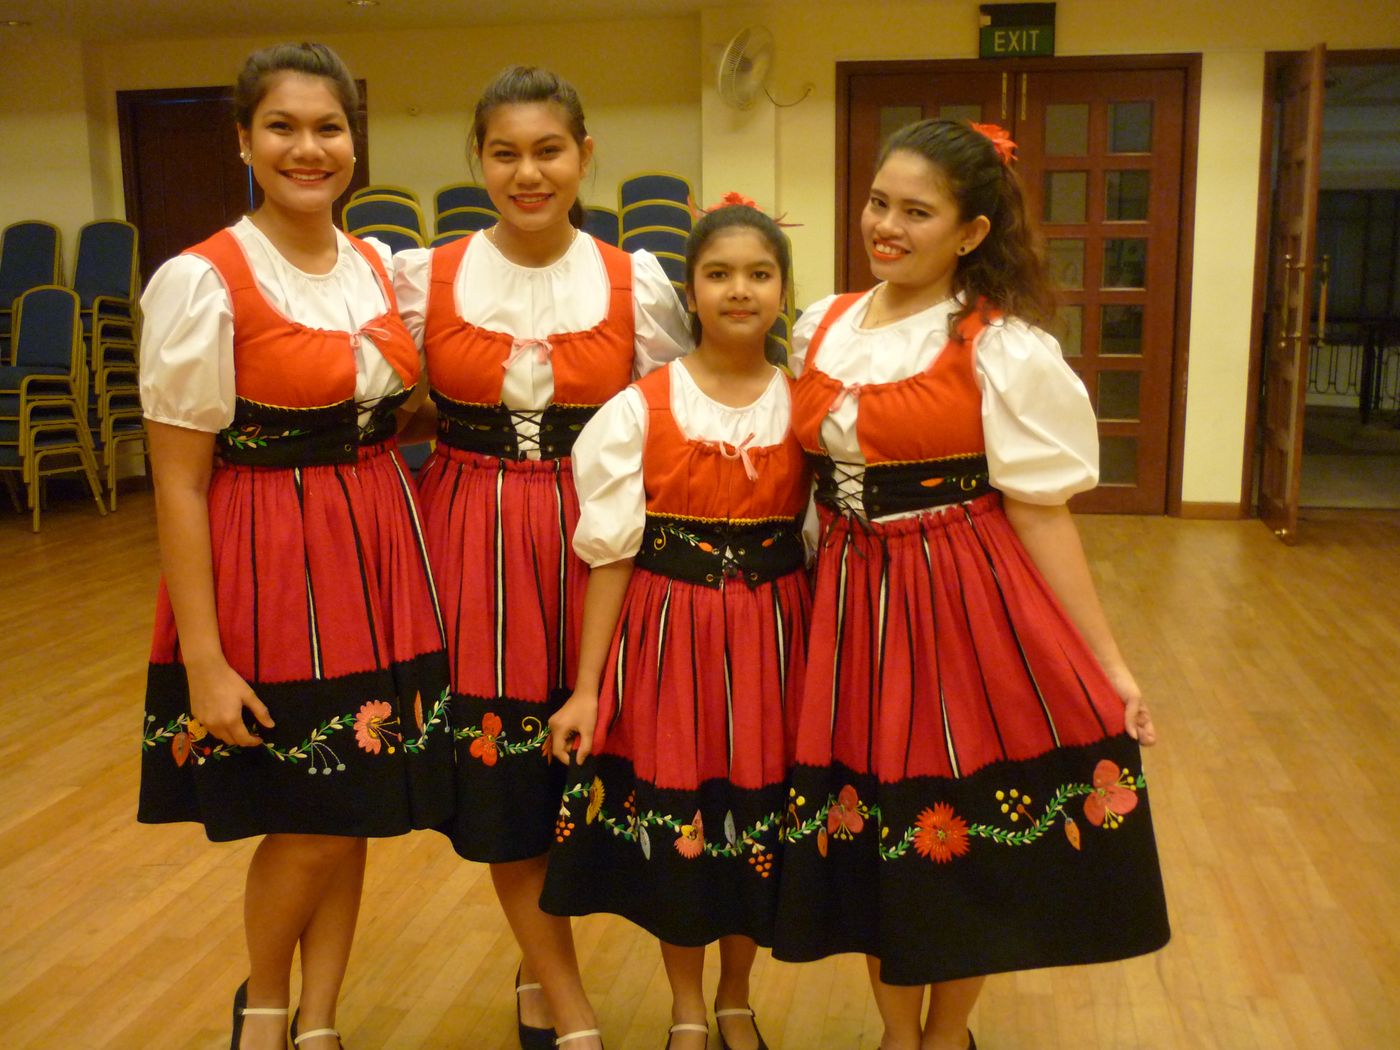 The costumes for Jinkli Nona are derived from traditional folk dancing costumes in the region of Minho, Portugal.